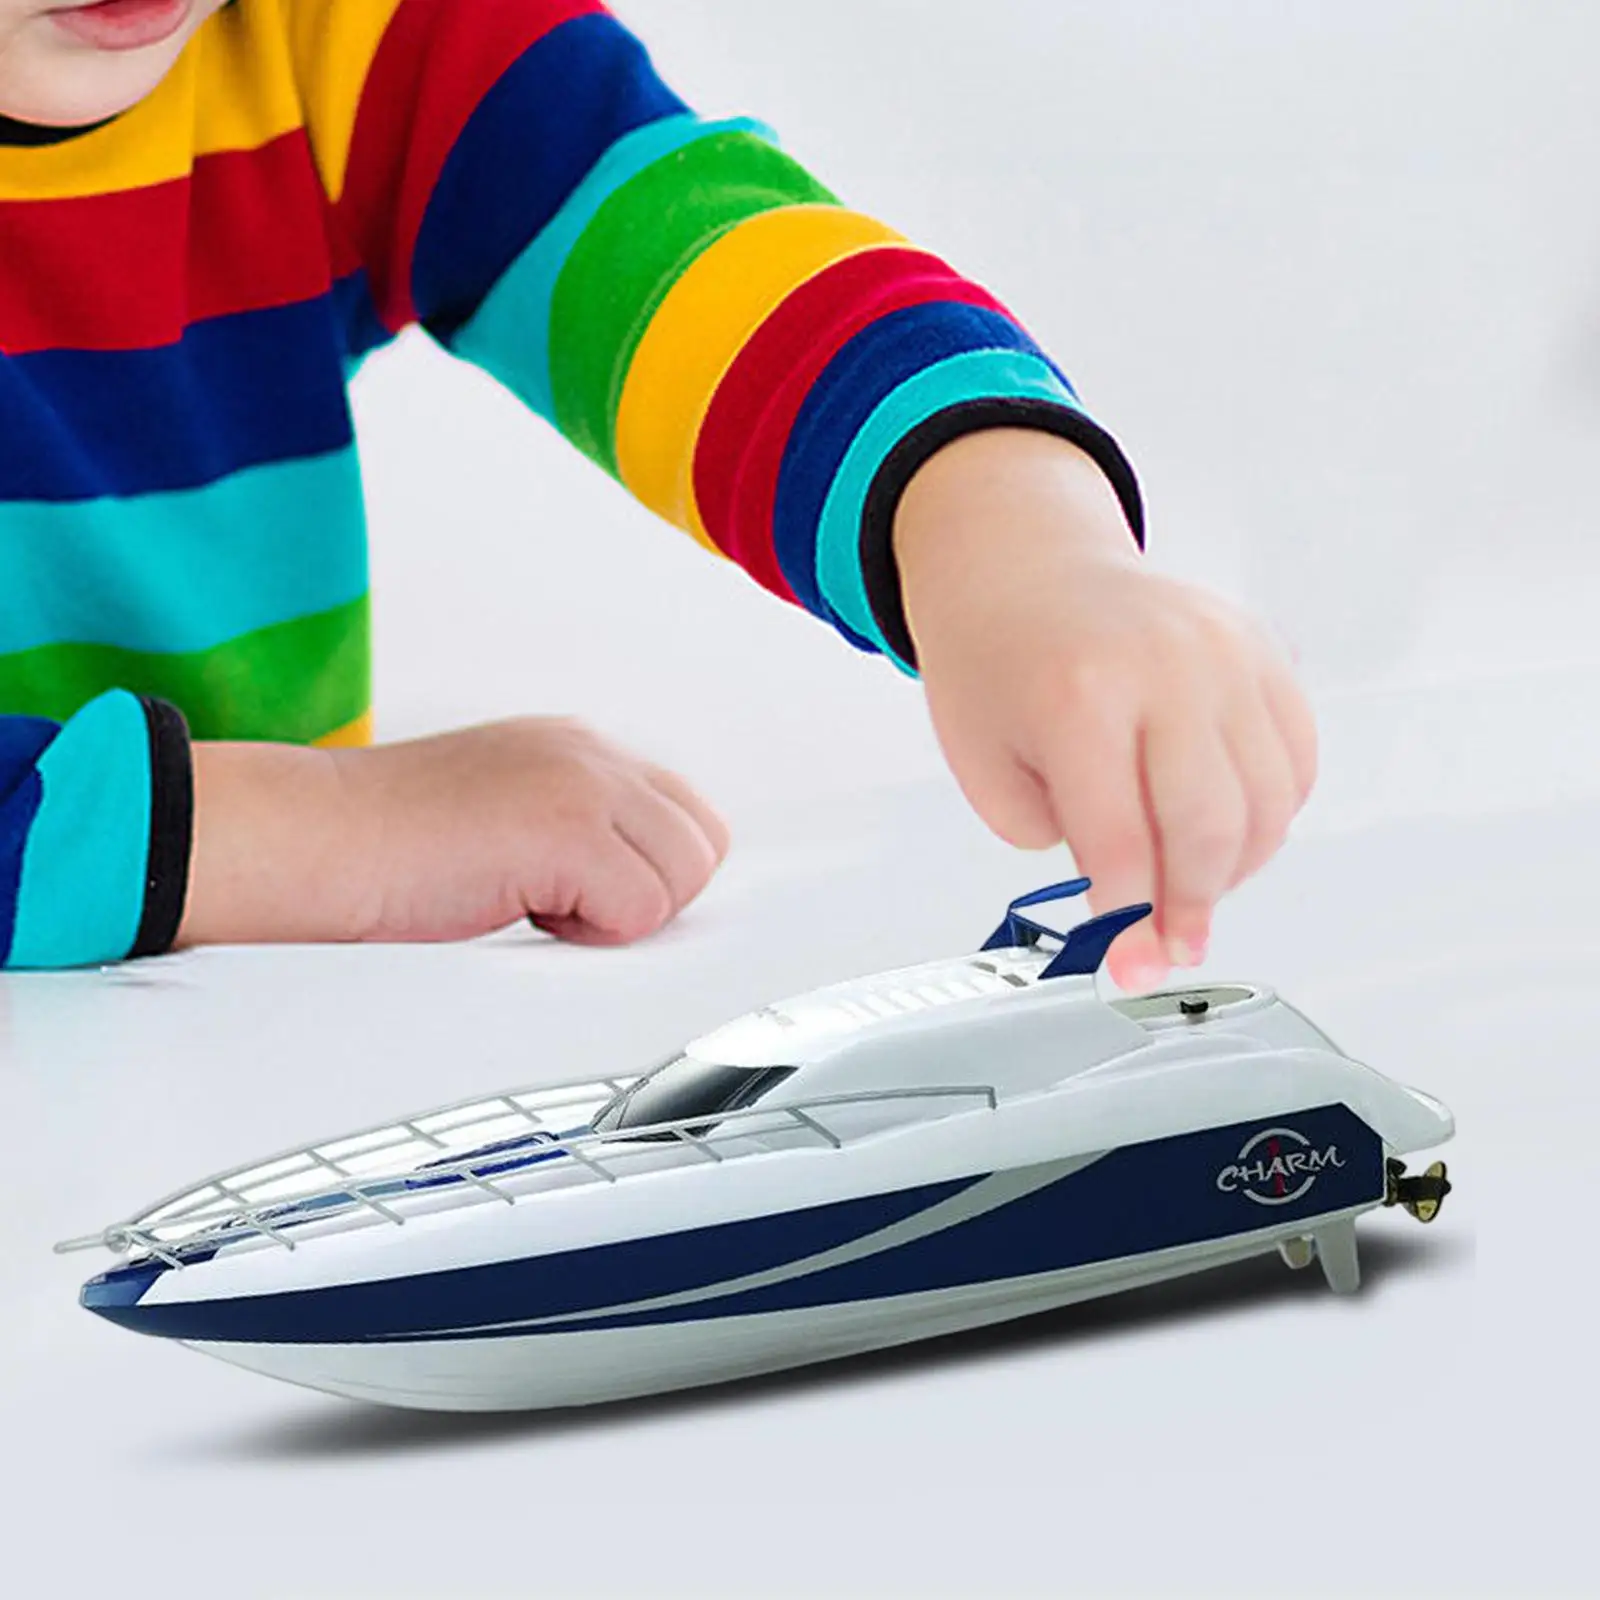 Portable Remote Control Boat Speedboat USB Rechargeable RC Boat Warship Model for Kids Children Boys Girls Birthday Gifts